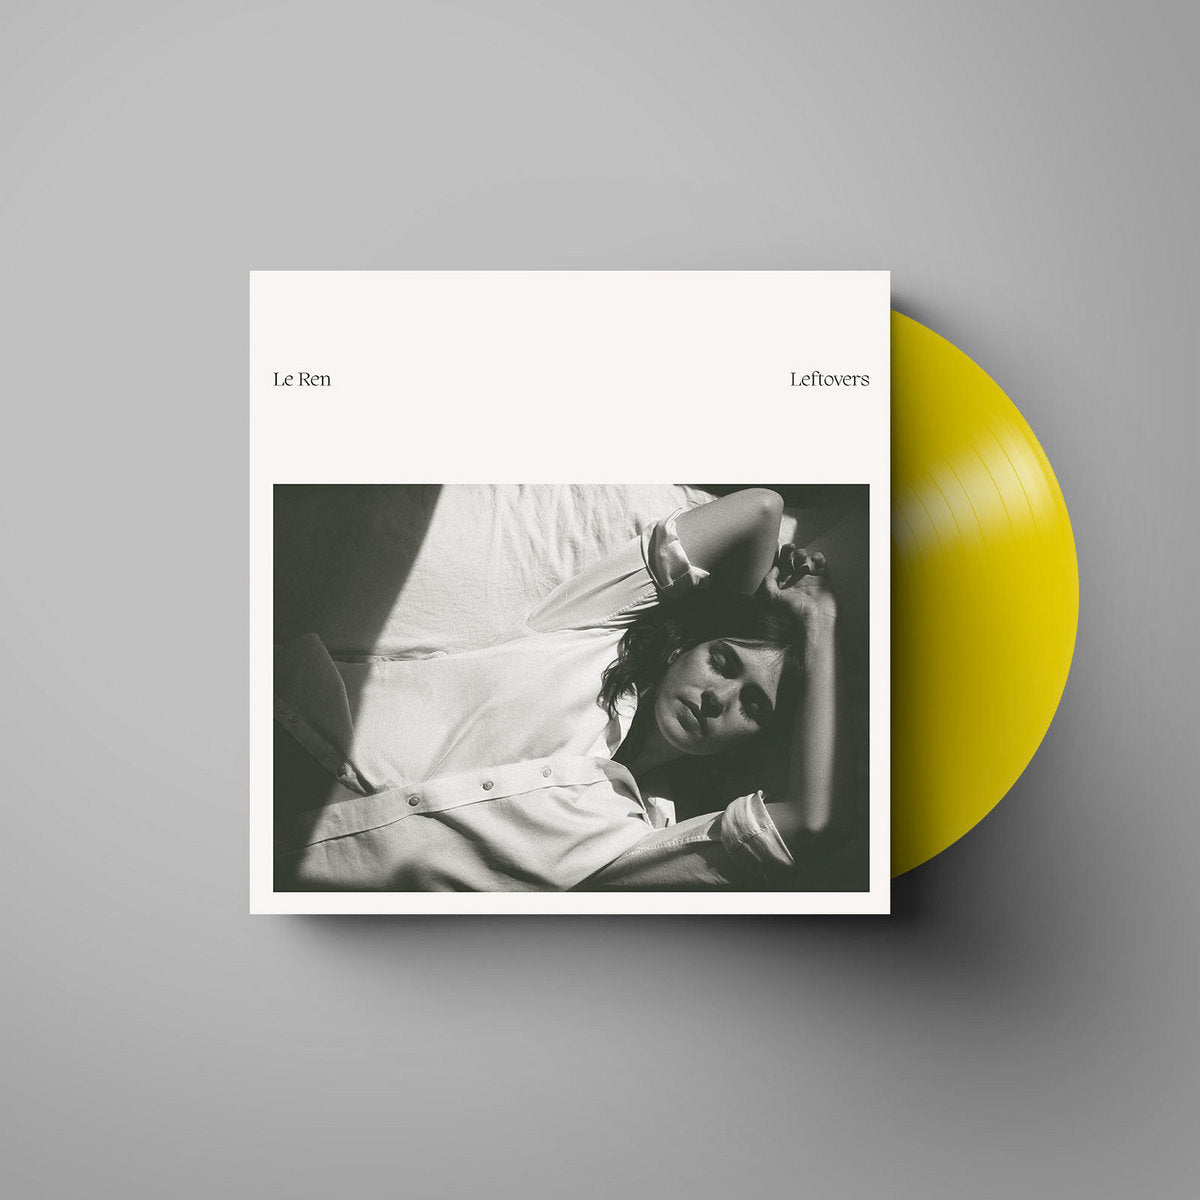 Le Ren - Leftovers (Limited Edition on Opaque Yellow Vinyl)